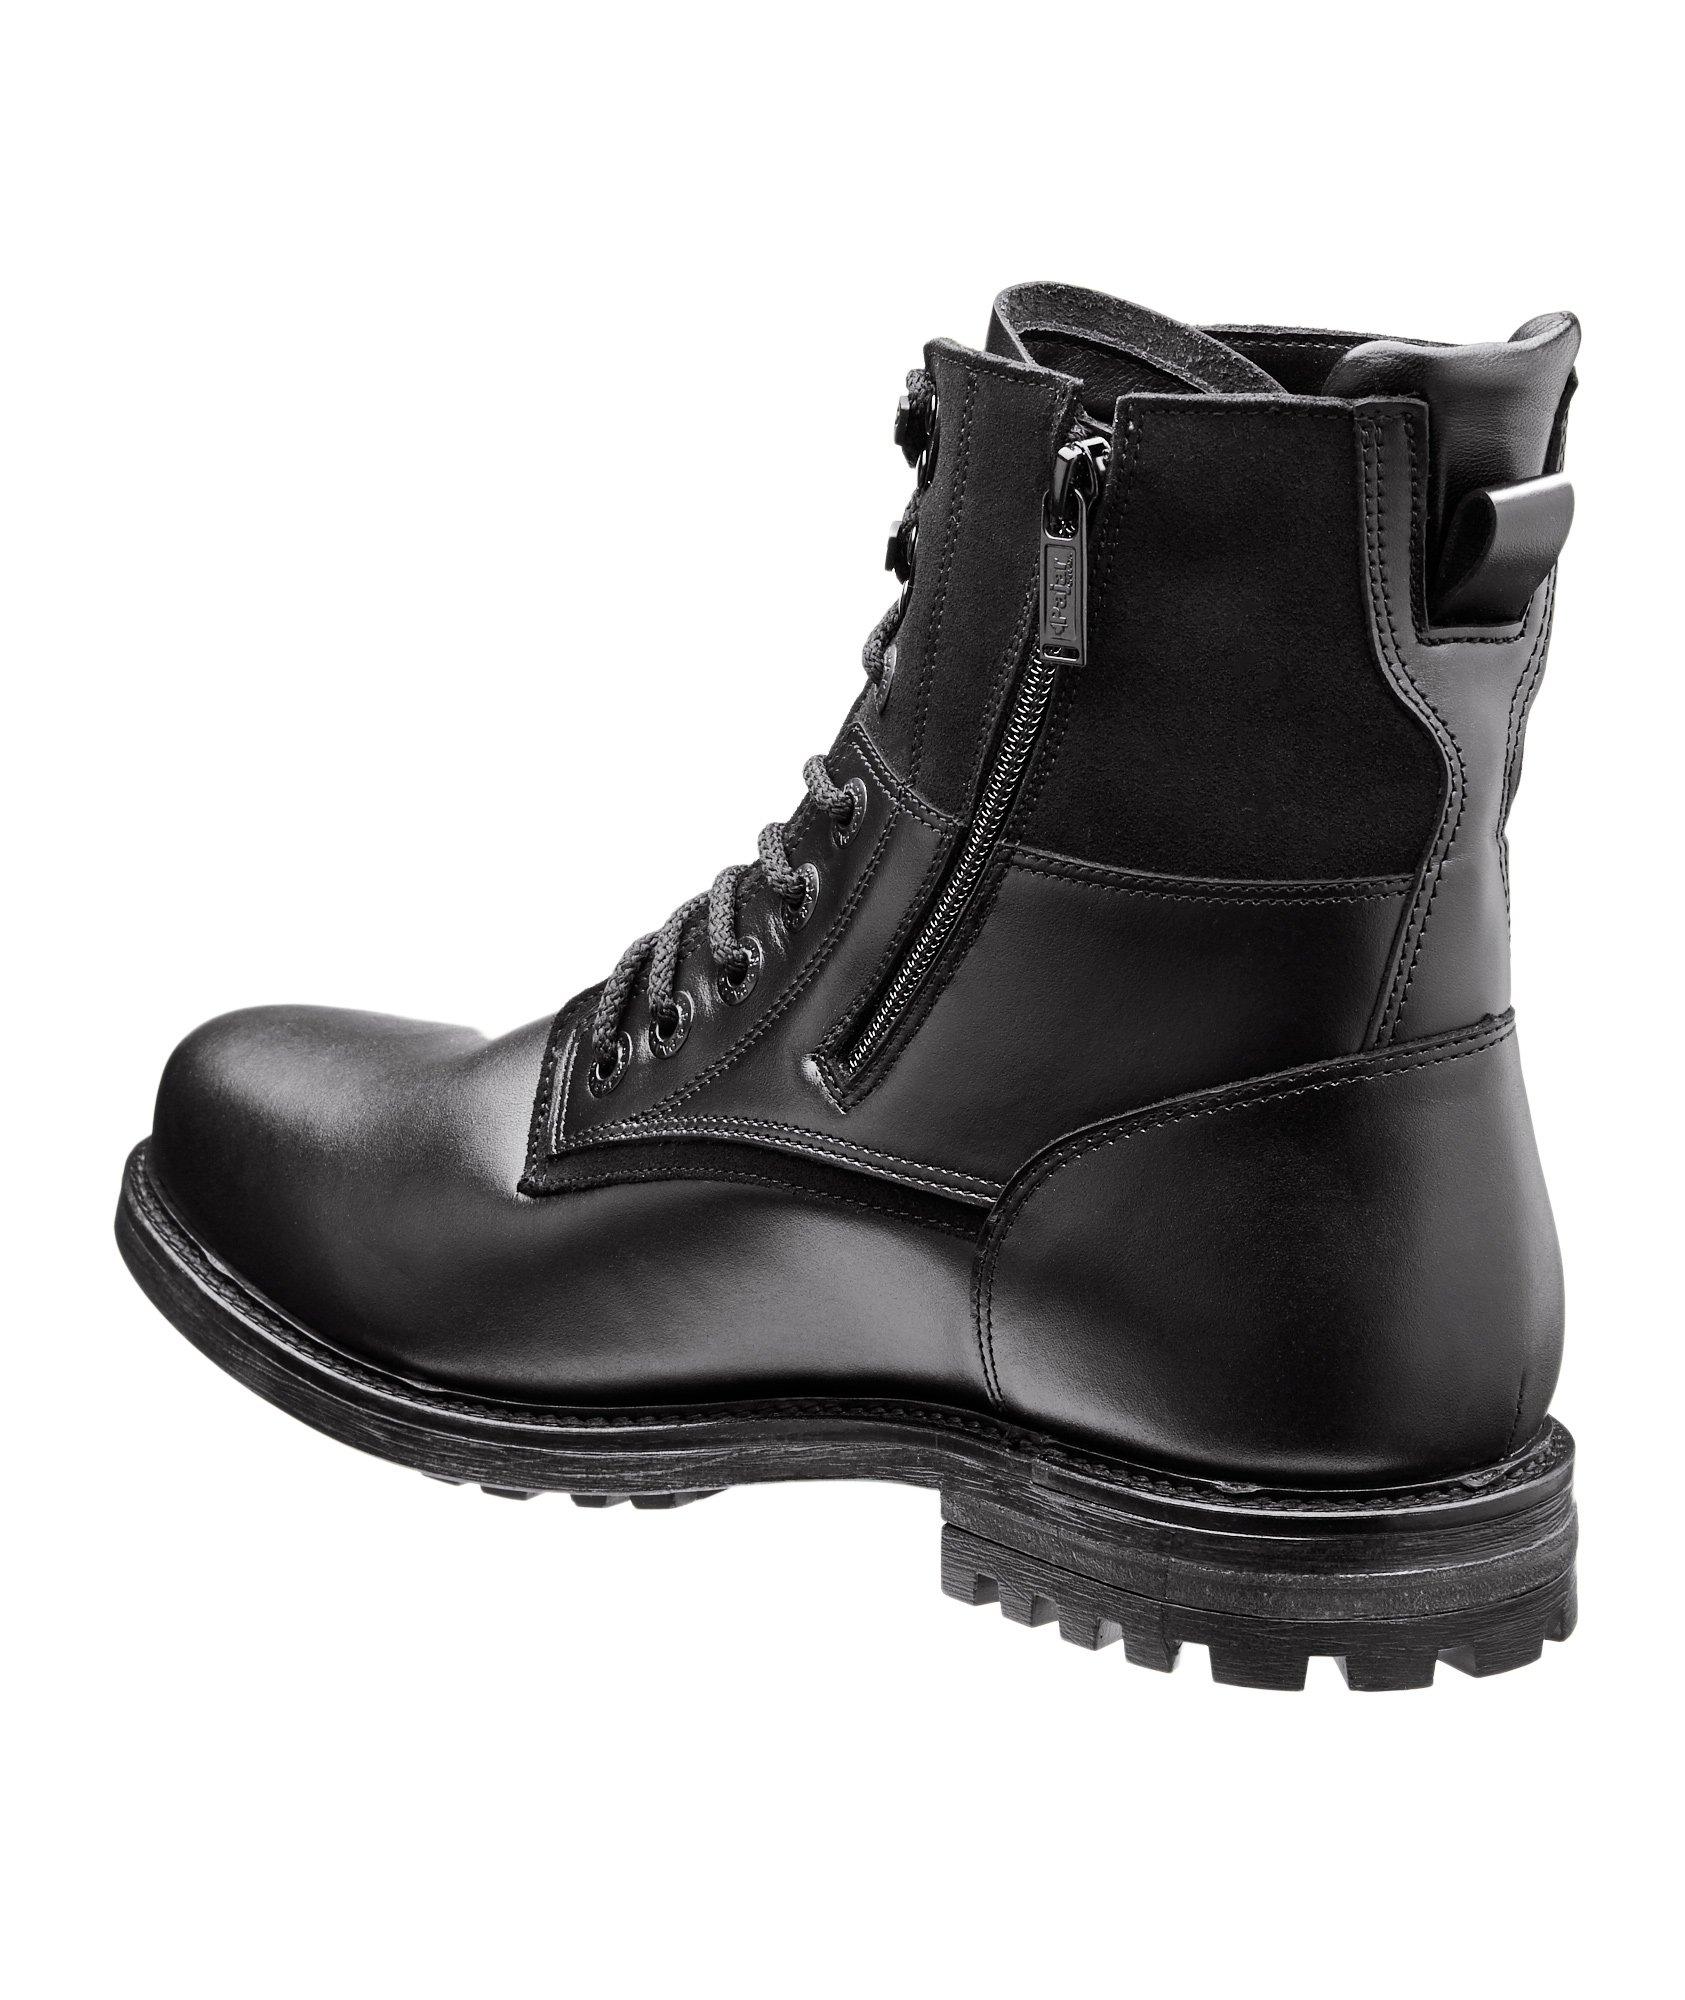 Waterproof Shearling Lined Boots image 1